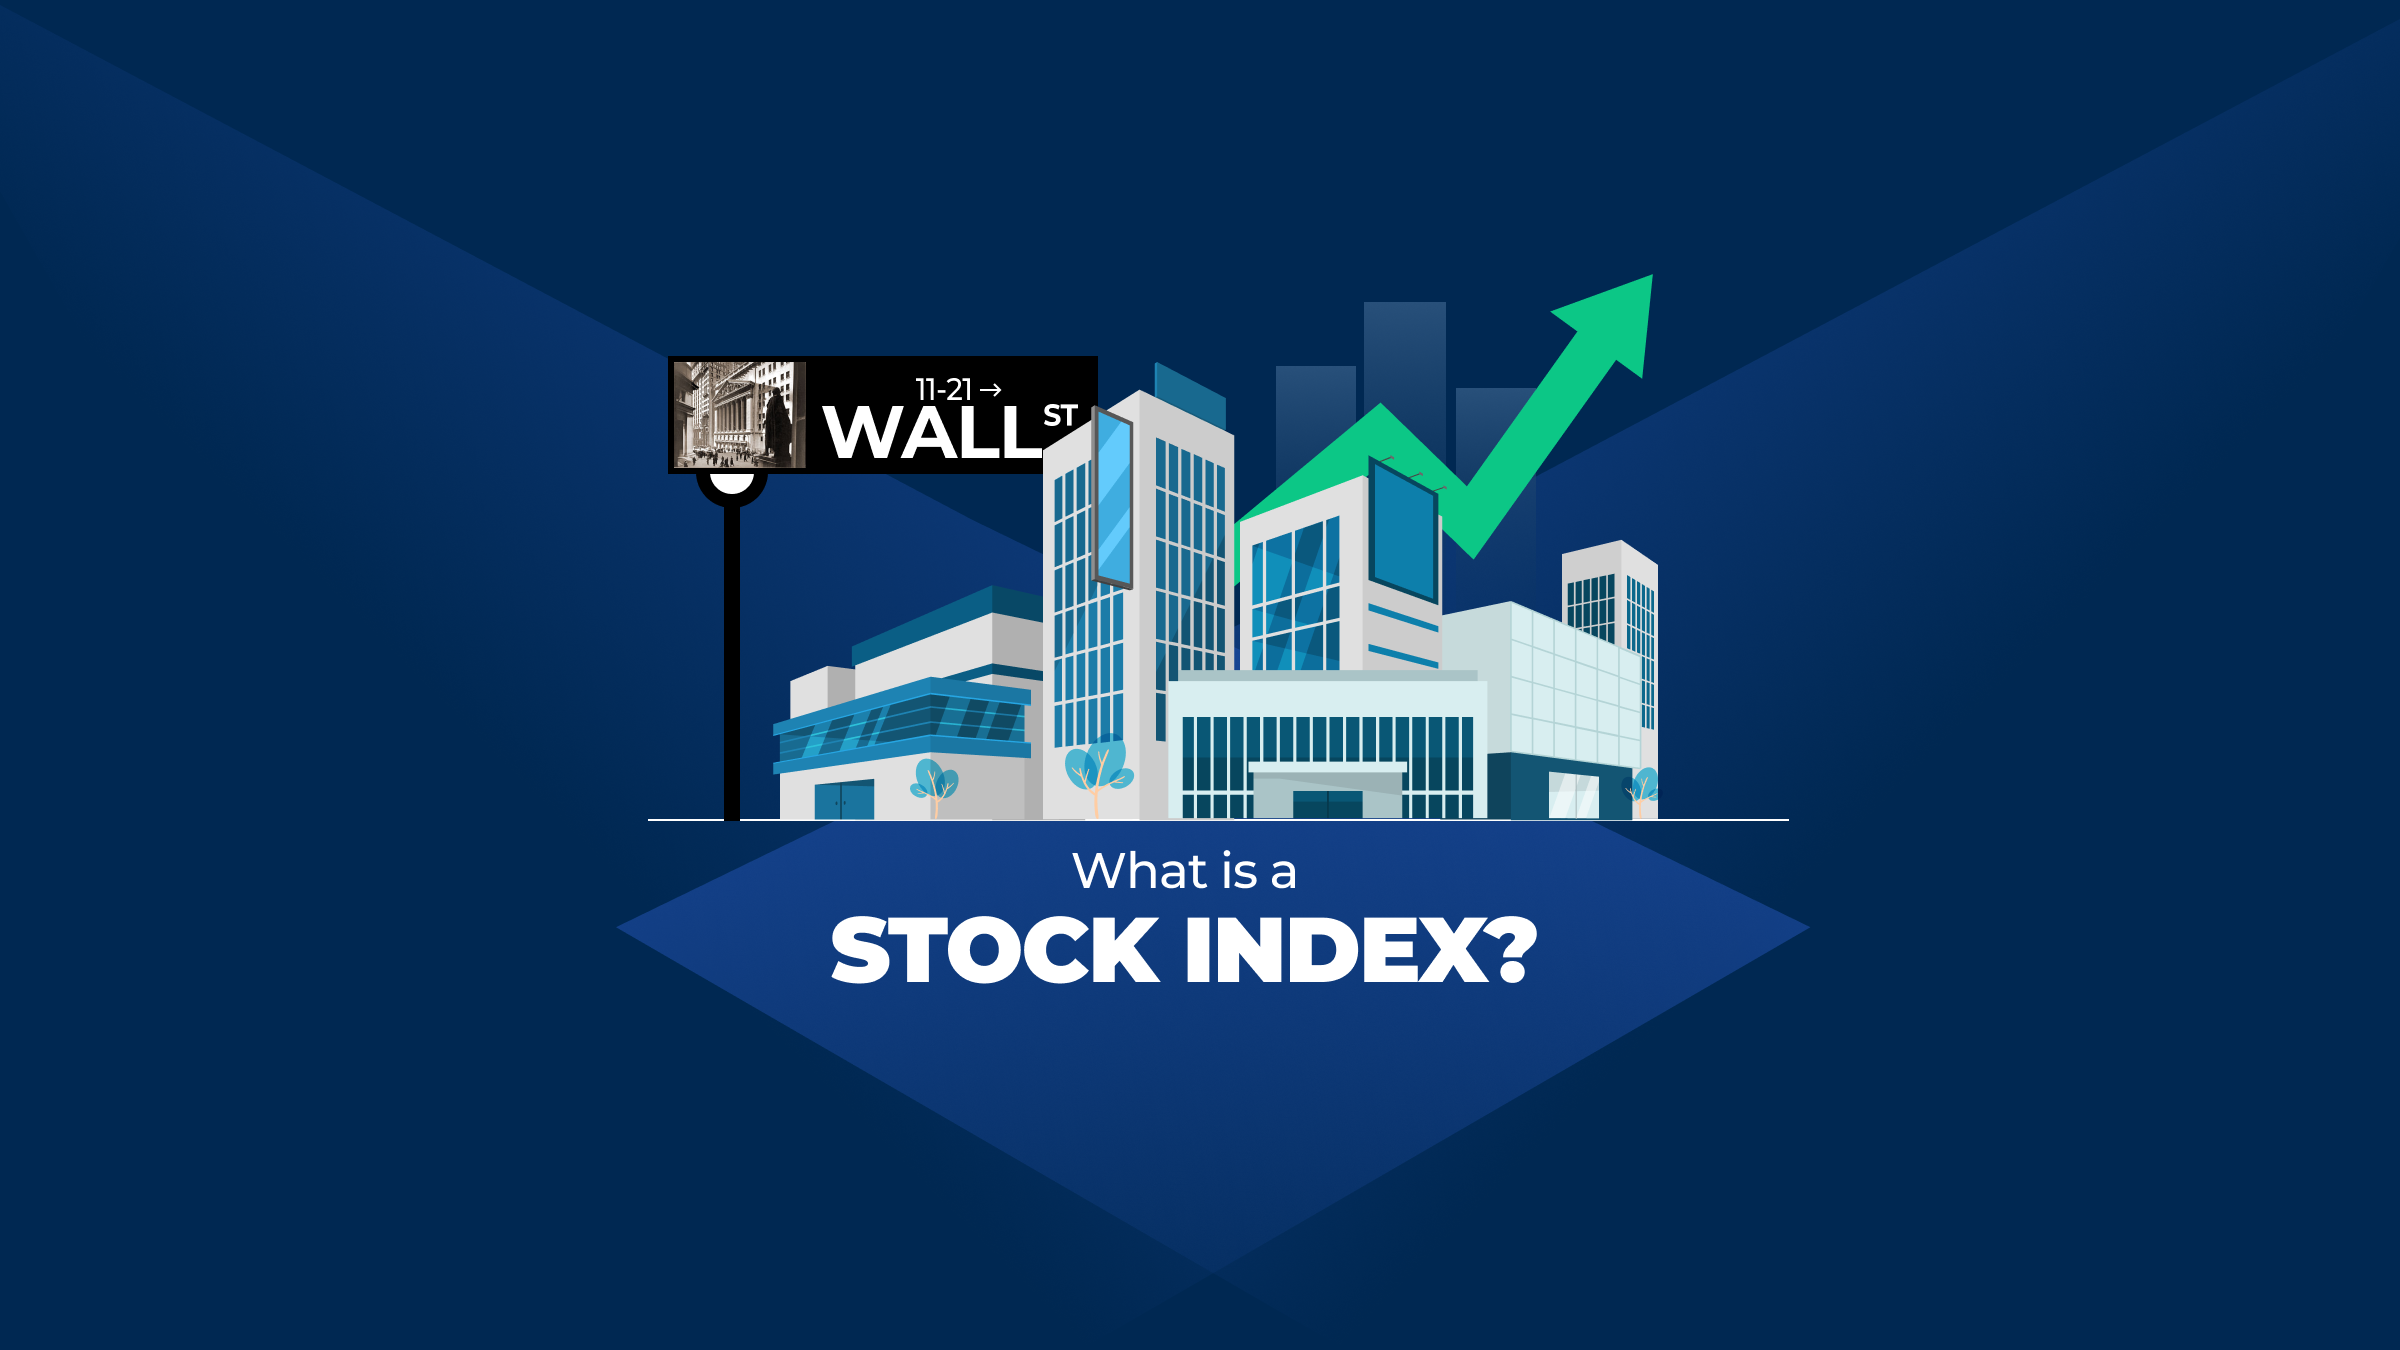 What is a Stock Index?